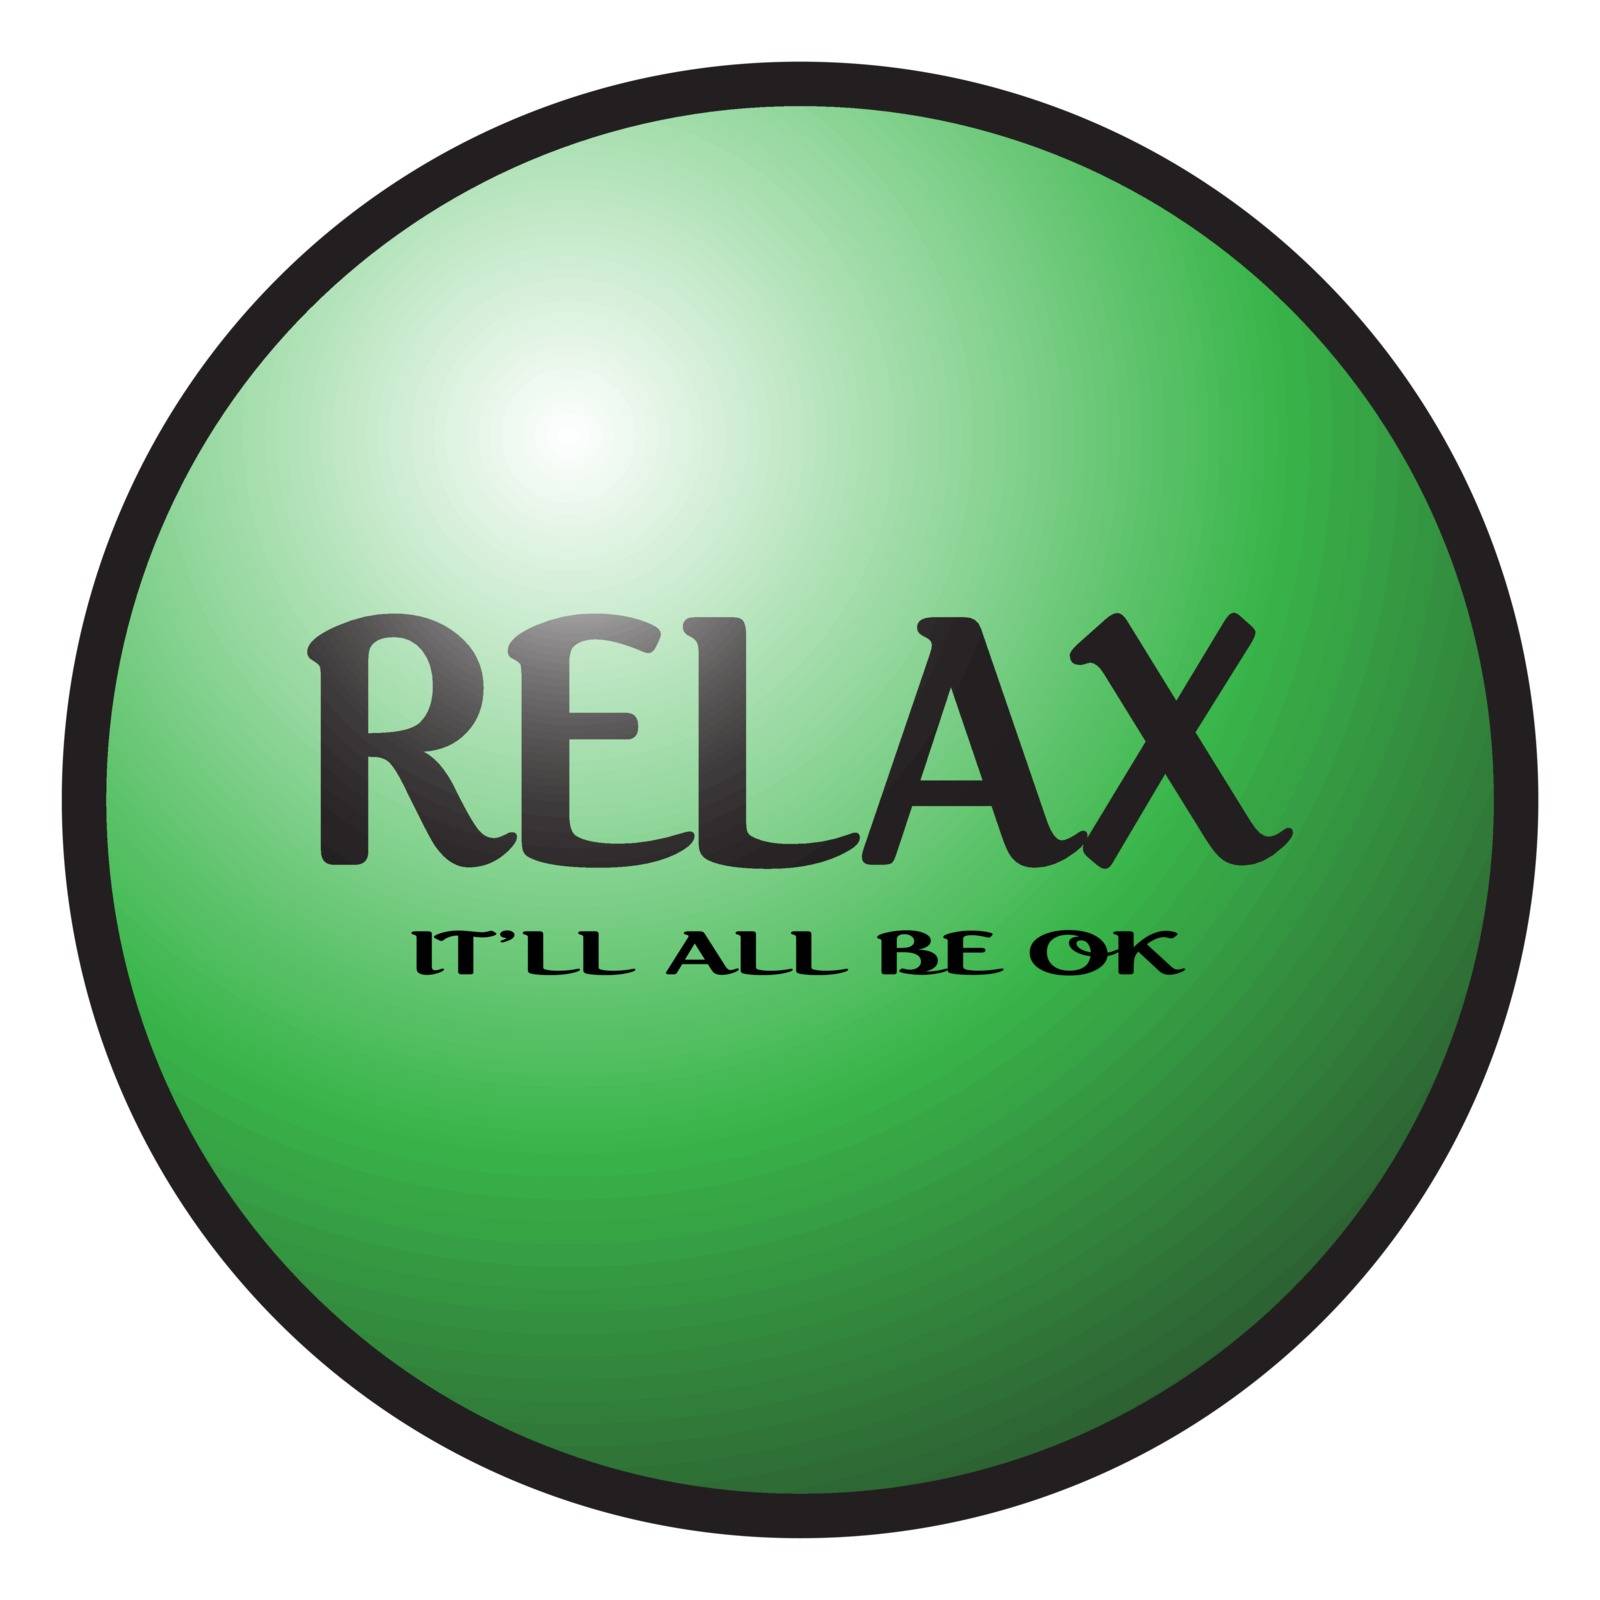 A big green button saying 'RELAX' and isolated on a white background